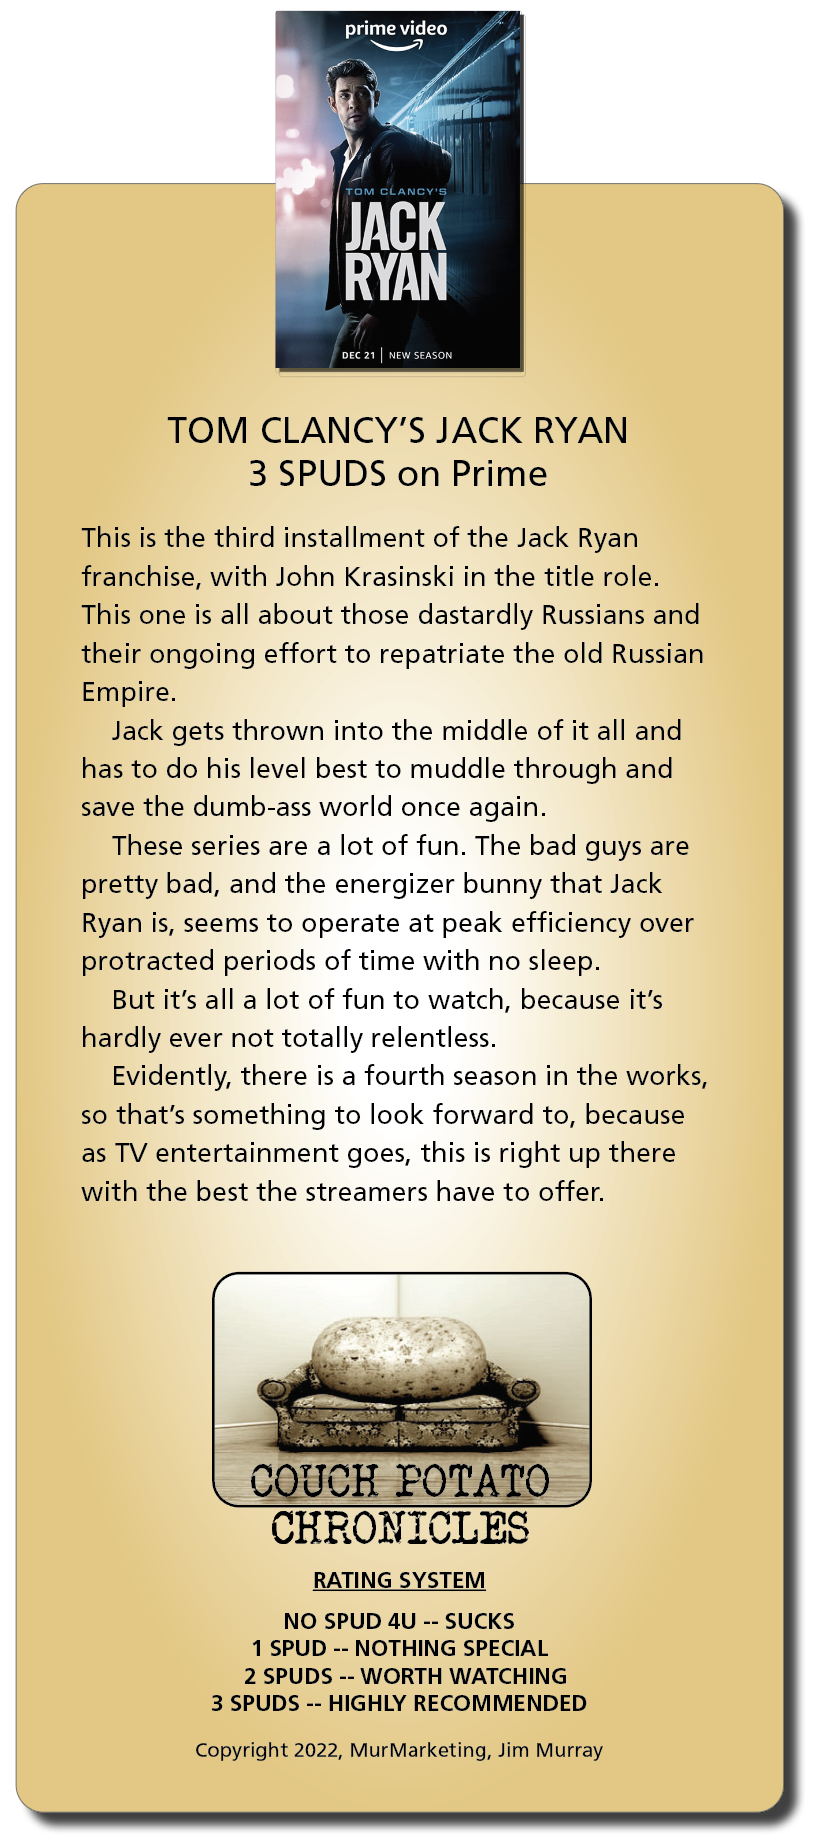 prime video
~—

-

 

TOM CLANCY'S JACK RYAN
3 SPUDS on Prime

This is the third installment of the Jack Ryan
franchise, with John Krasinski in the title role.
This one is all about those dastardly Russians and
their ongoing effort to repatriate the old Russian
Empire.

Jack gets thrown into the middle of it all and
has to do his level best to muddle through and
save the dumb-ass world once again.

These series are a lot of fun. The bad guys are
pretty bad, and the energizer bunny that Jack
Ryan is, seems to operate at peak efficiency over
protracted periods of time with no sleep.

But it's all a lot of fun to watch, because it's
hardly ever not totally relentless.

Evidently, there is a fourth season in the works,
so that's something to look forward to, because
as TV entertainment goes, this is right up there
with the best the streamers have to offer.

COUCH POTATO
CHRONICLES

RATING SYSTEM

NO SPUD 4U -- SUCKS
1 SPUD -- NOTHING SPECIAL
2 SPUDS -- WORTH WATCHING
3 SPUDS -- HIGHLY RECOMMENDED

 

Copyright 2022, MurMarketing, Jim Murray